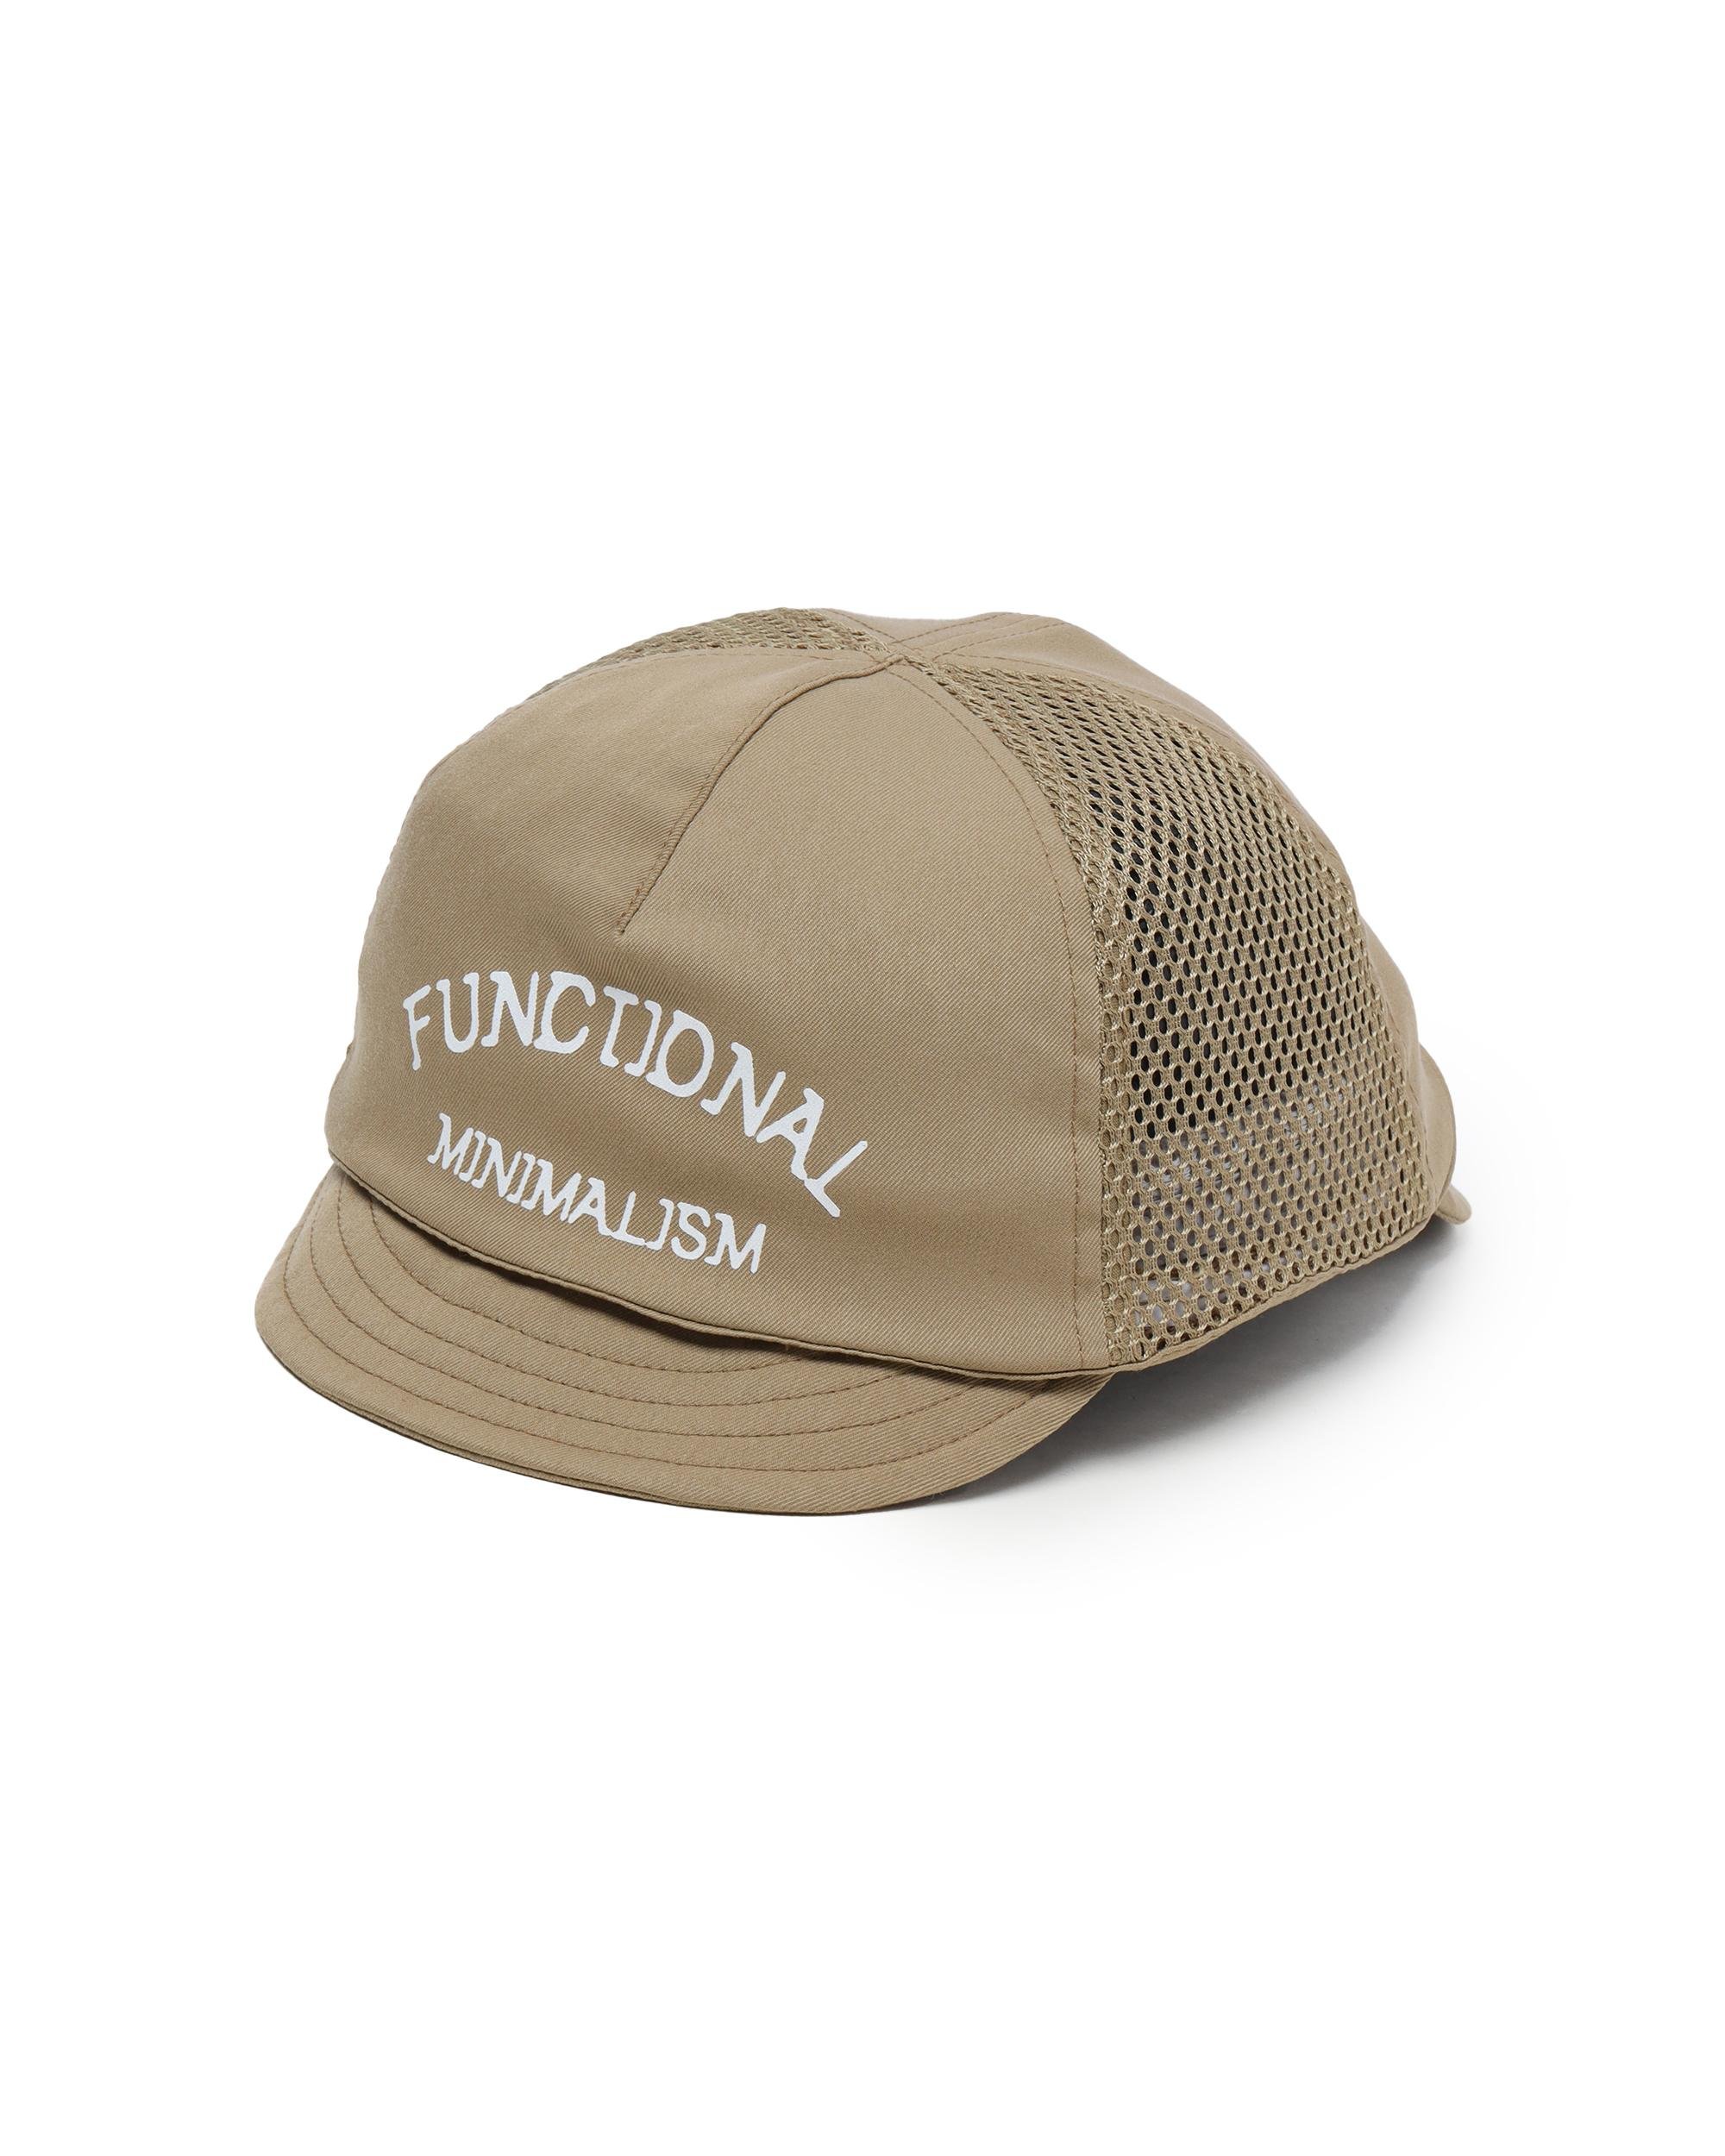 Embroidered cap by COMFY OUTDOOR GARMENT